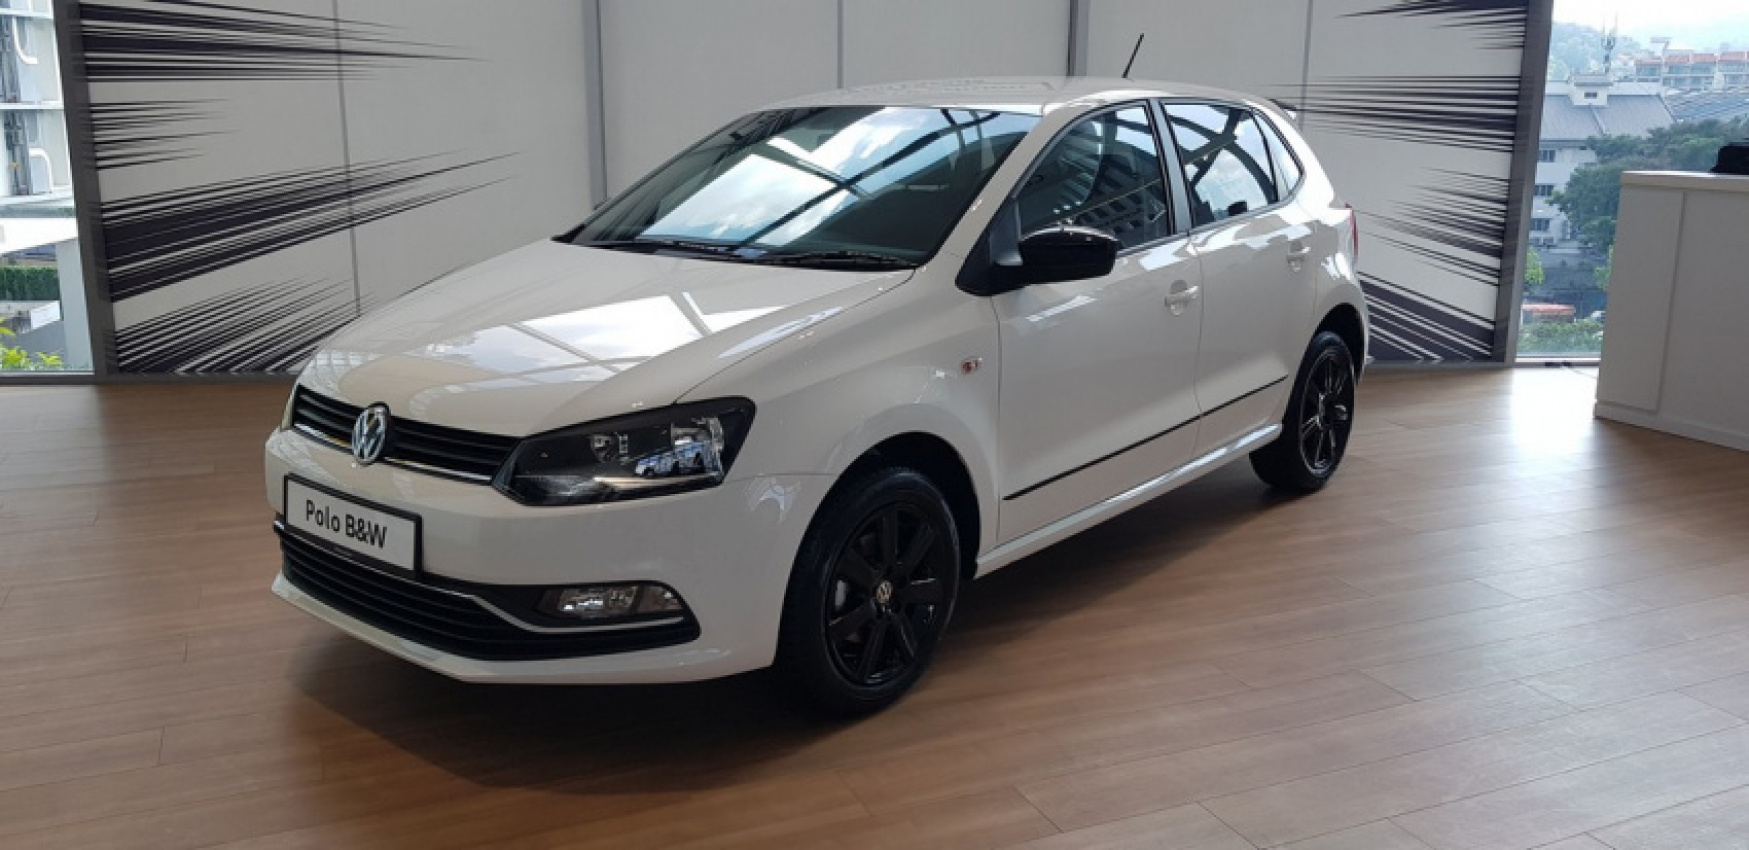 autos, car brands, cars, volkswagen, android, lazada, promotions, sales, volkswagen polo, android, buy a limited edition volkswagen polo b & w on lazada 11.11